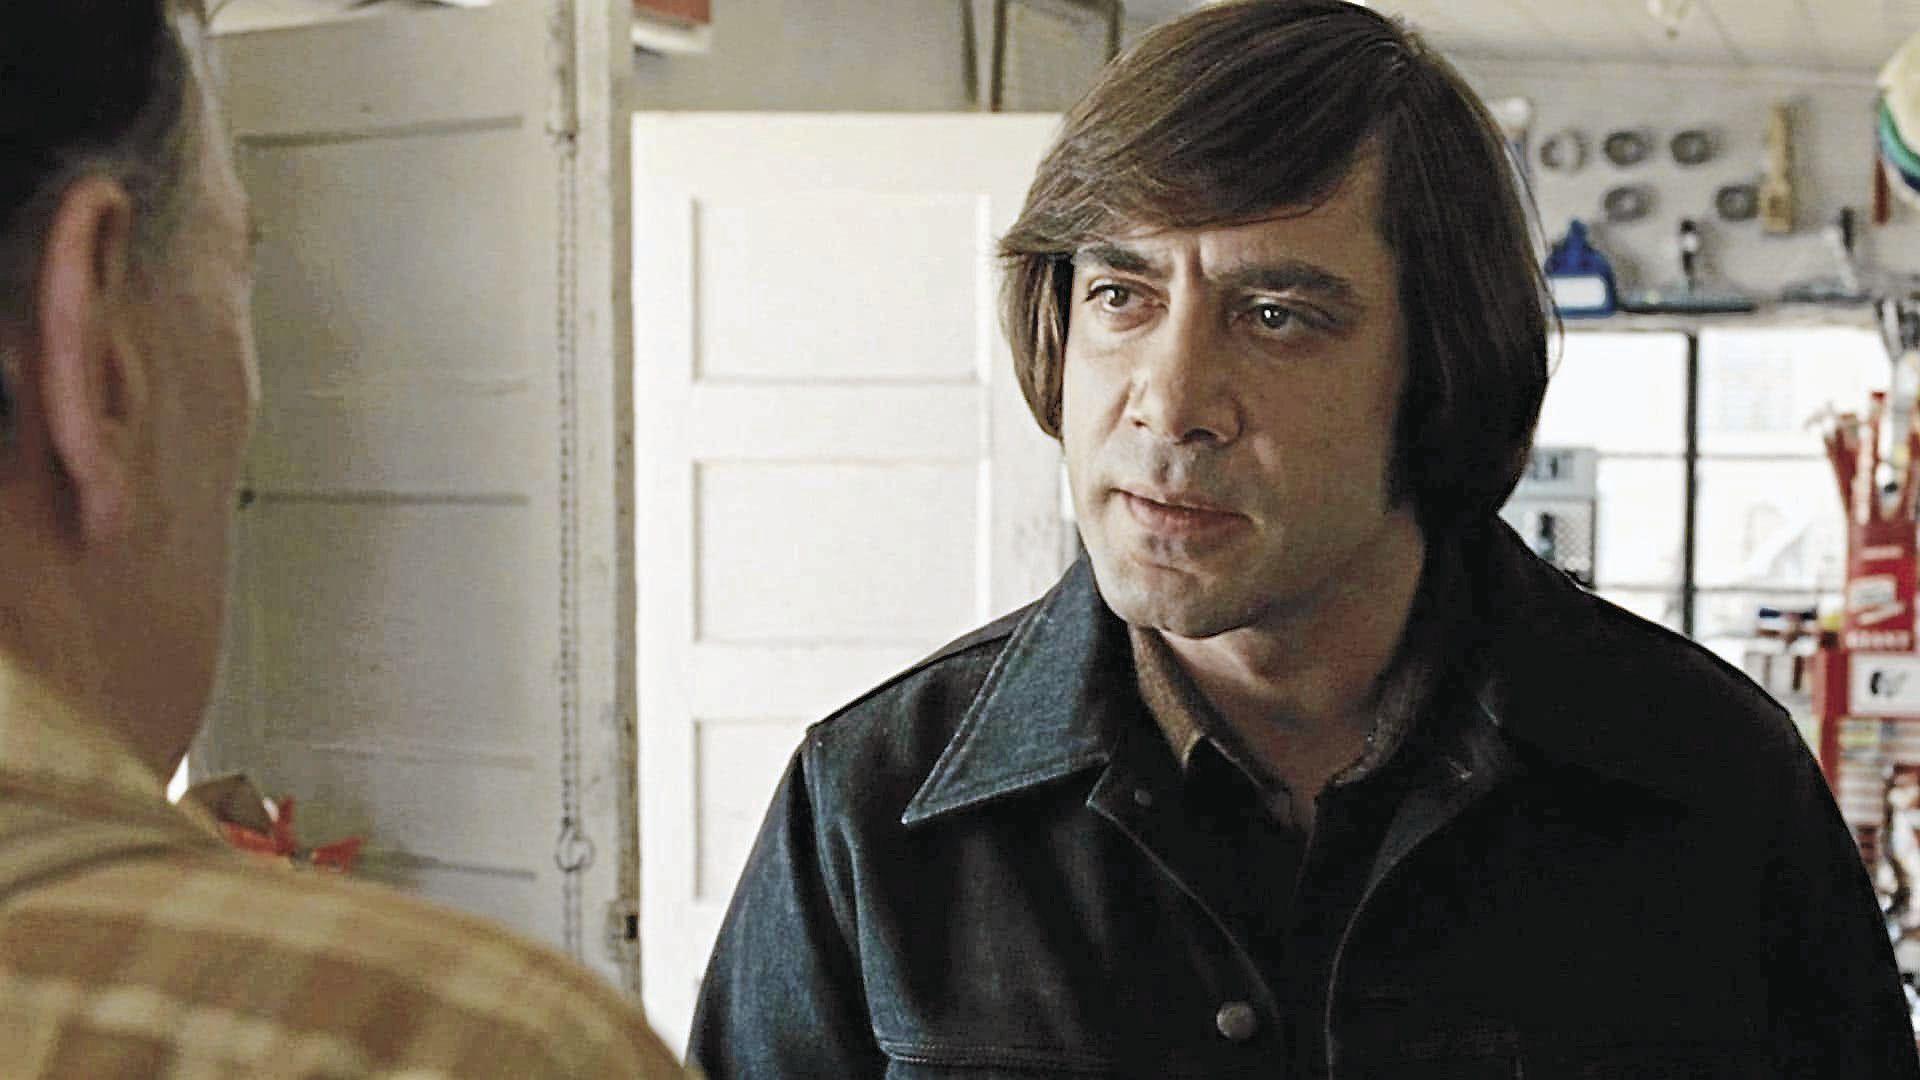 Anton Chigurh, 'No Country for Old Men' (2007)